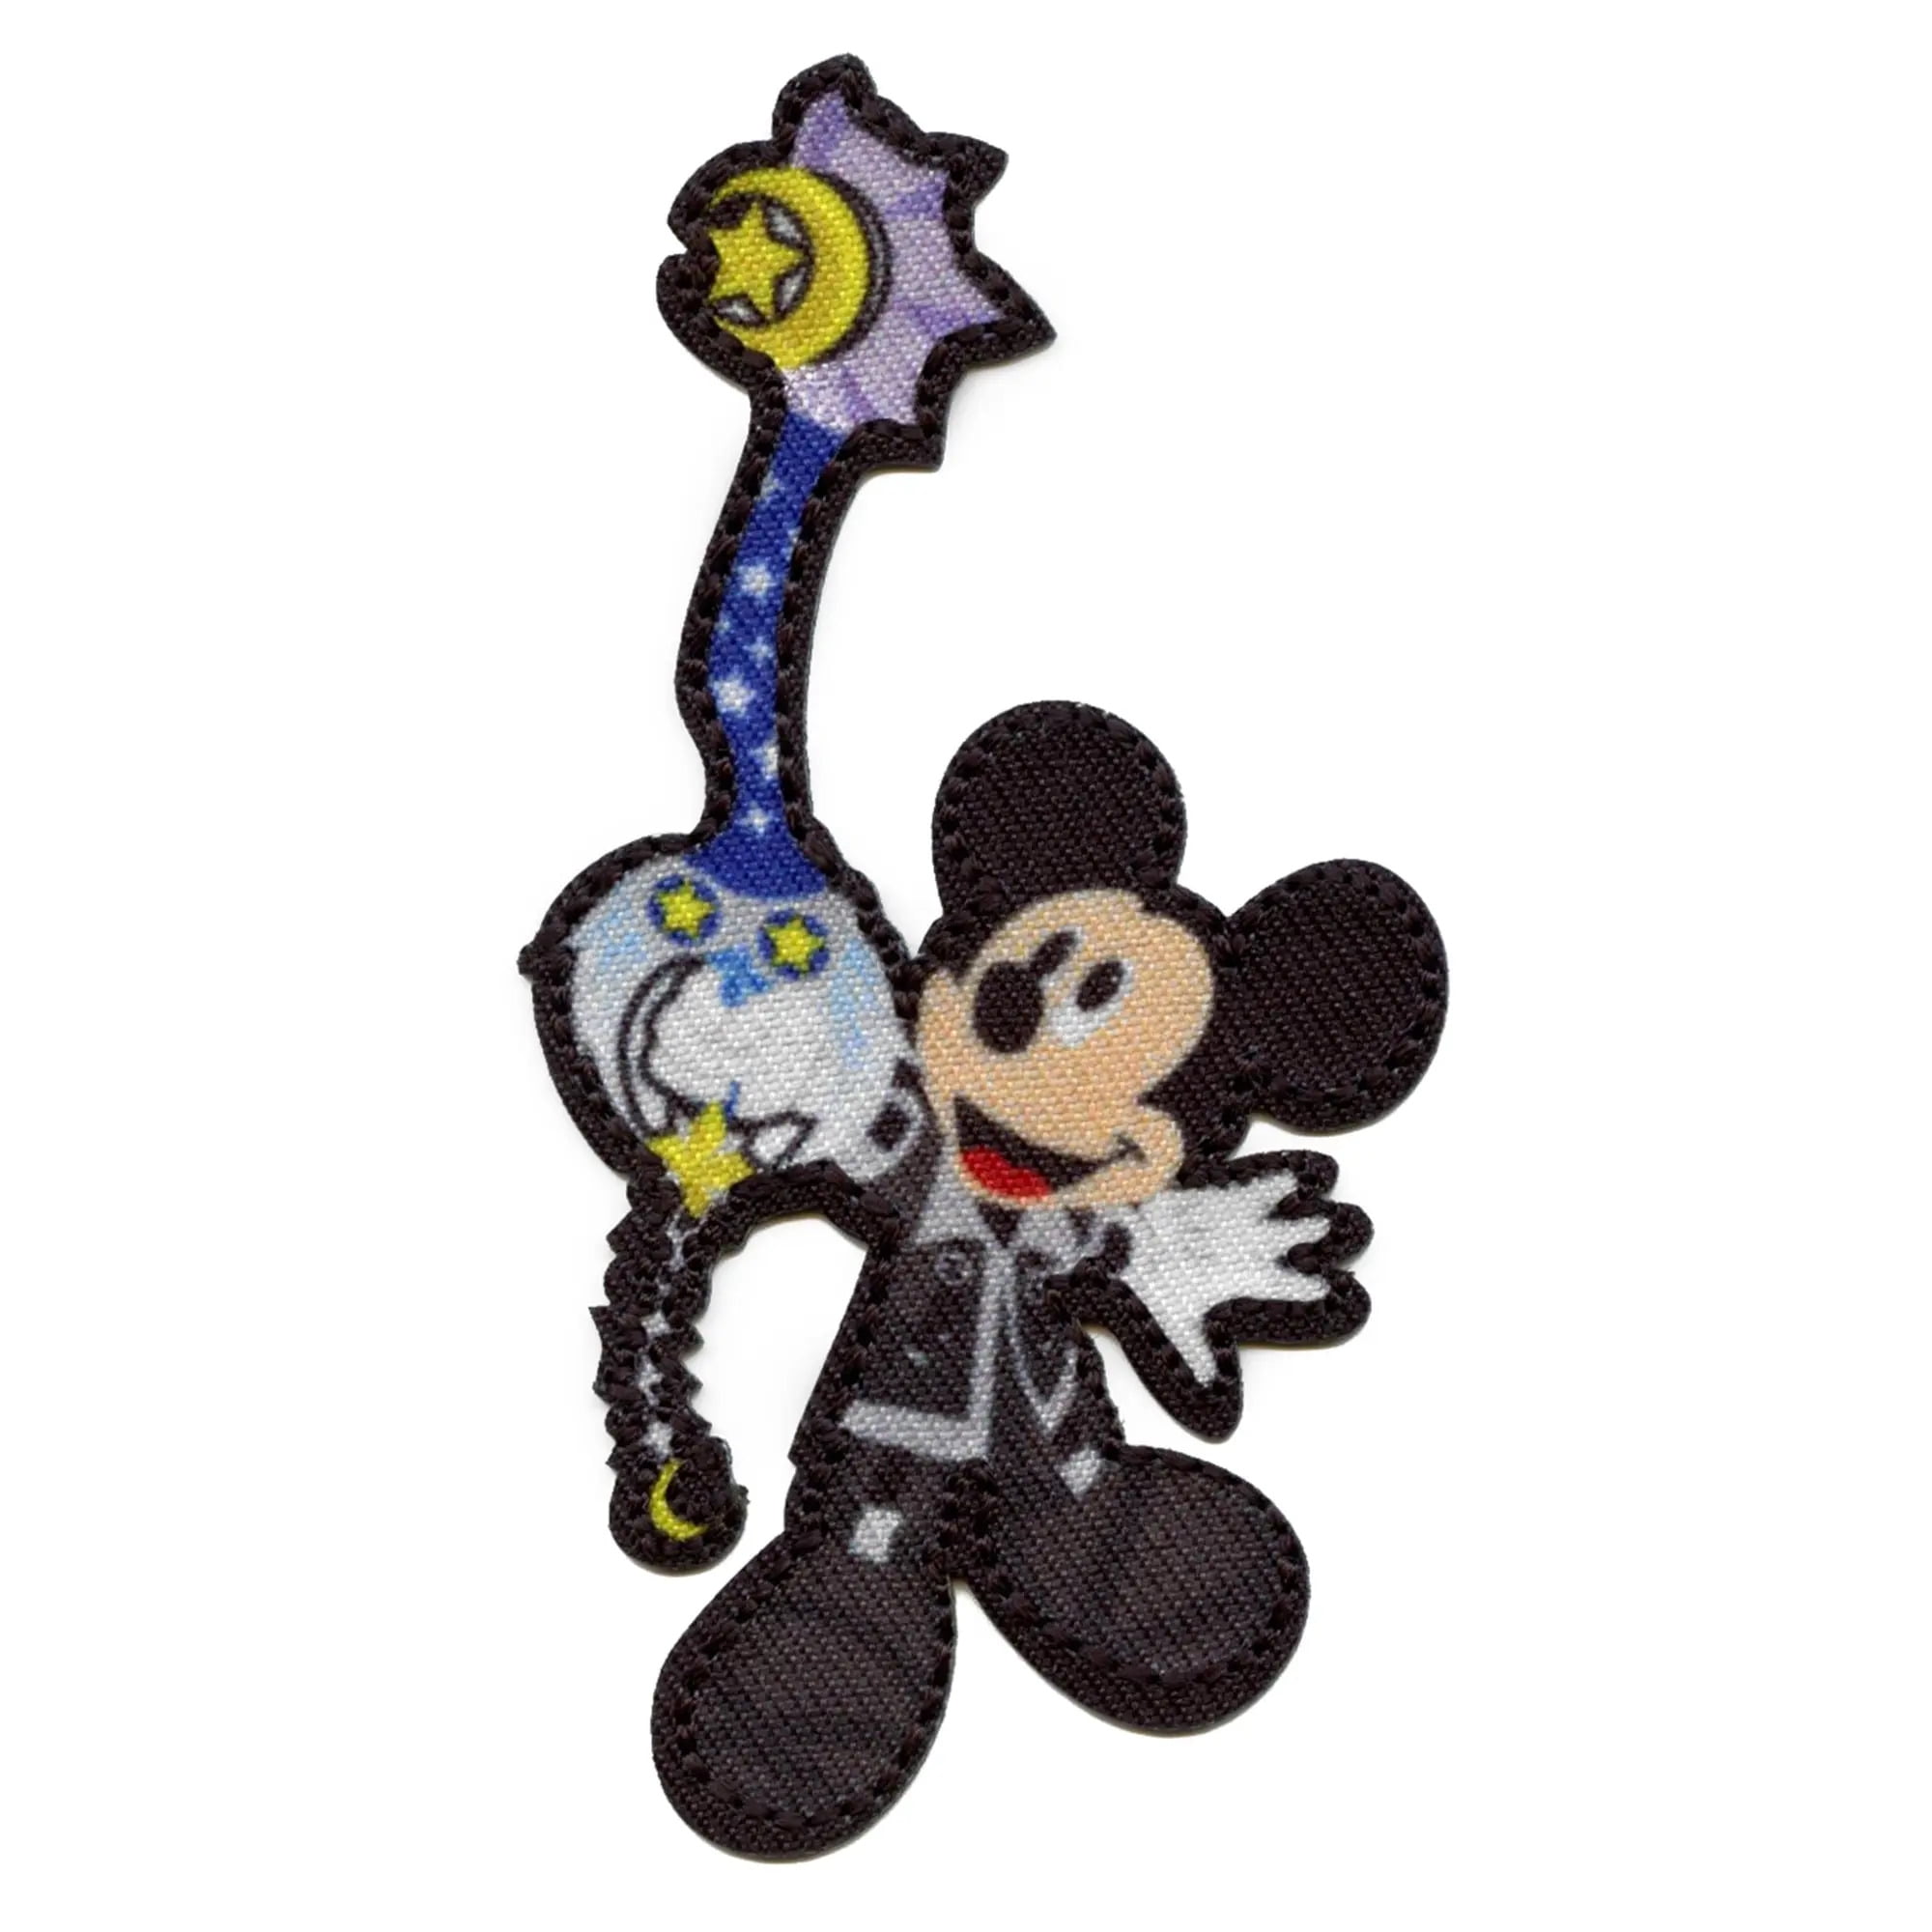 Mickey iron on patch Disney patches iron on Patches For Jacket Sew On Patch